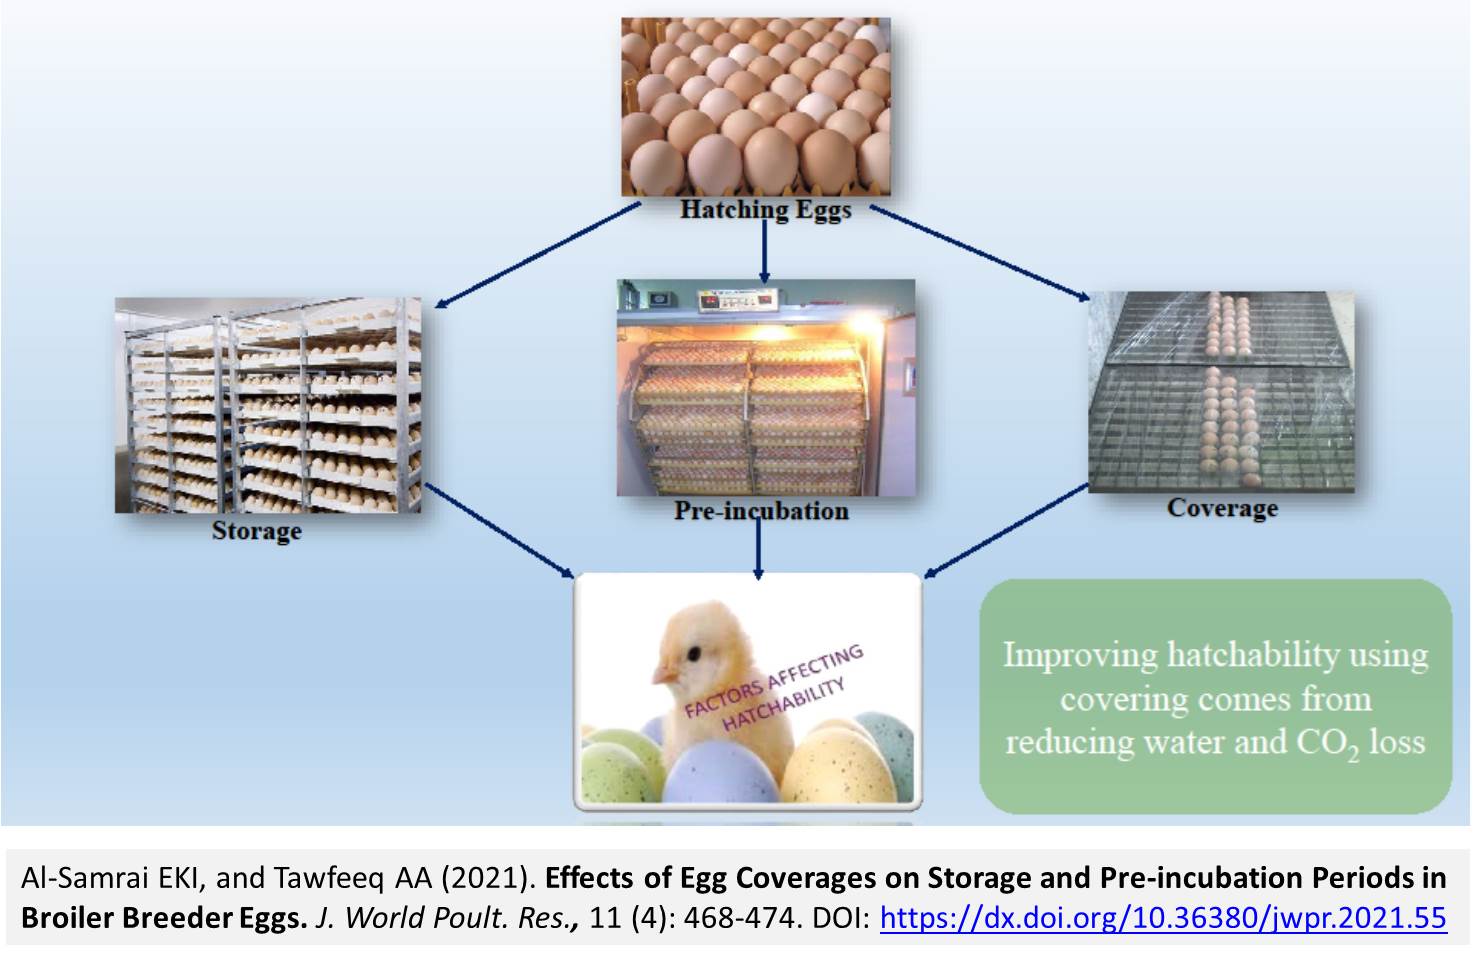 79-Egg_Coverages_on_Storage_and_Pre-incubation_Periods_